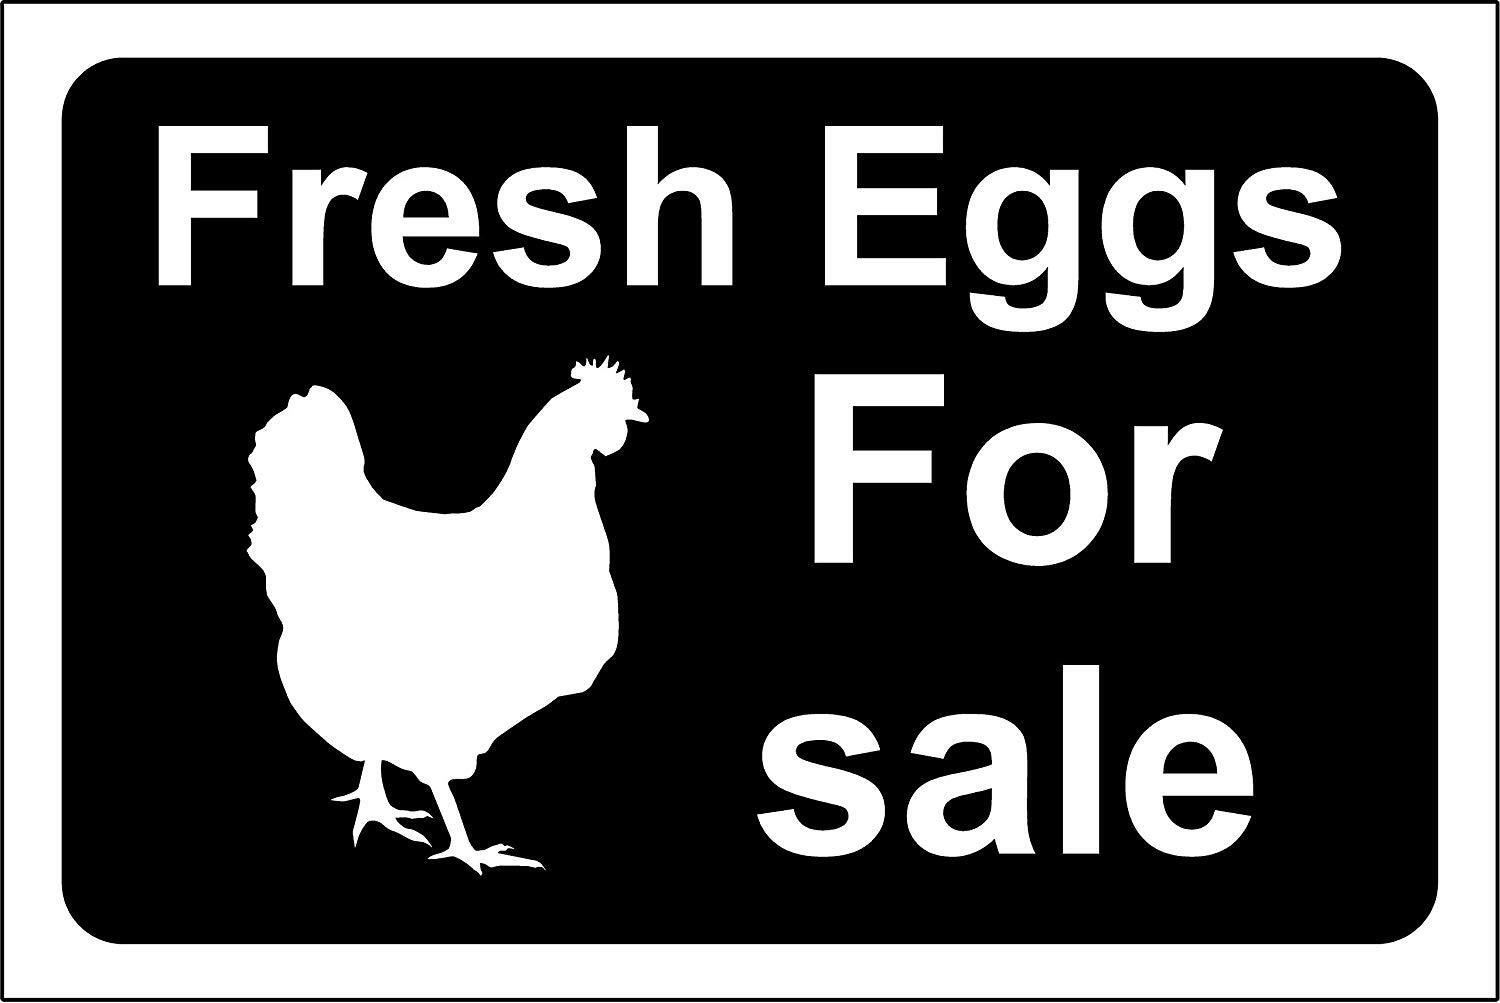 Fresh eggs for sale sign